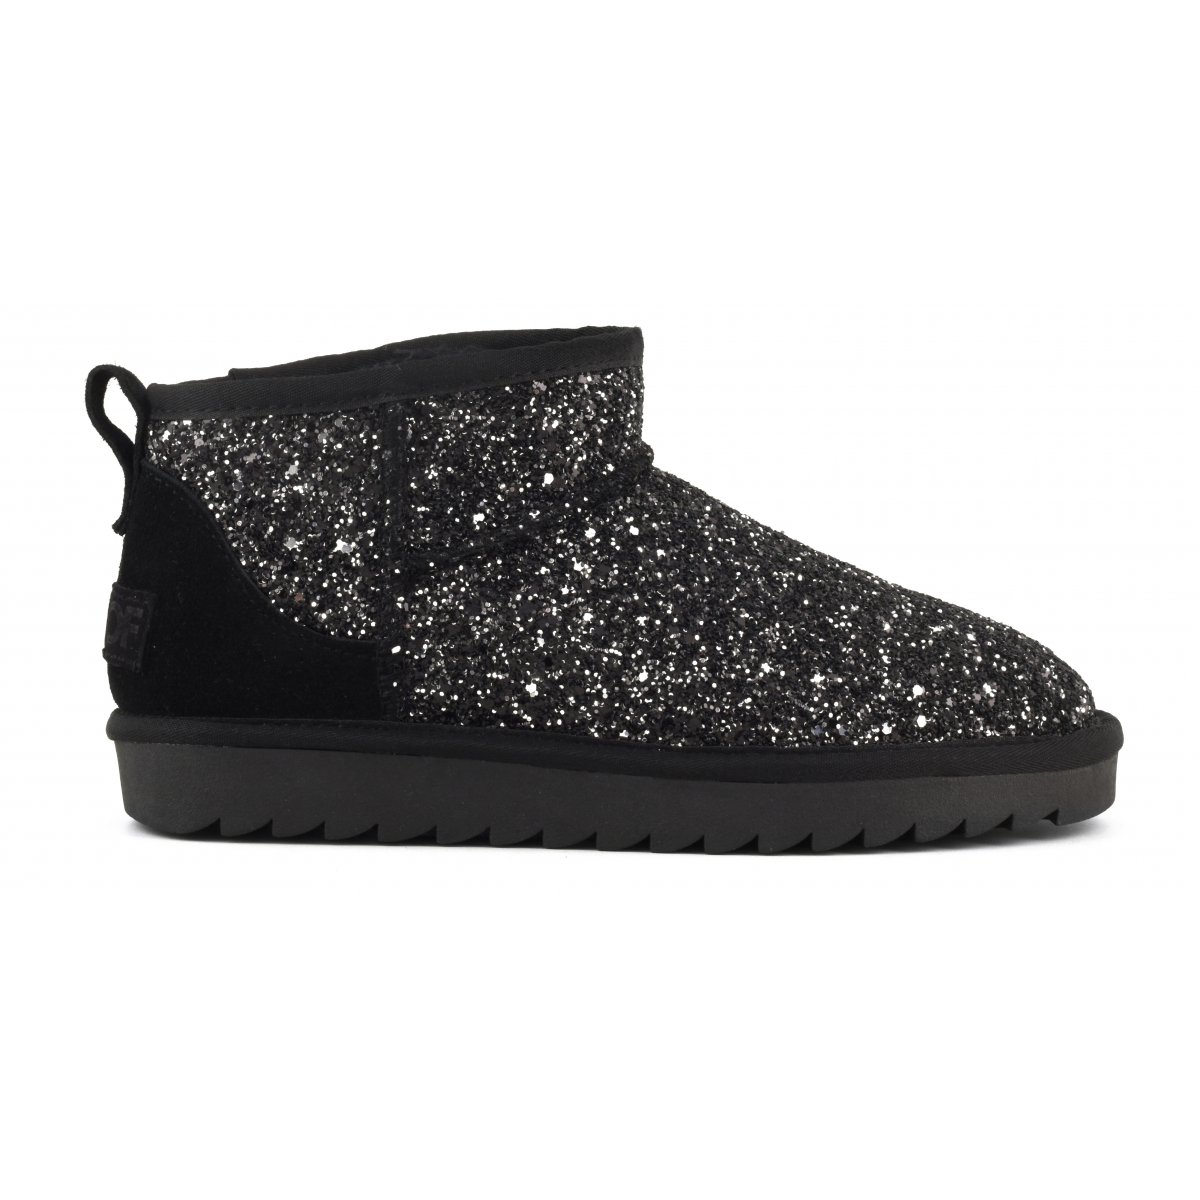 Ankle winter boot in glitter